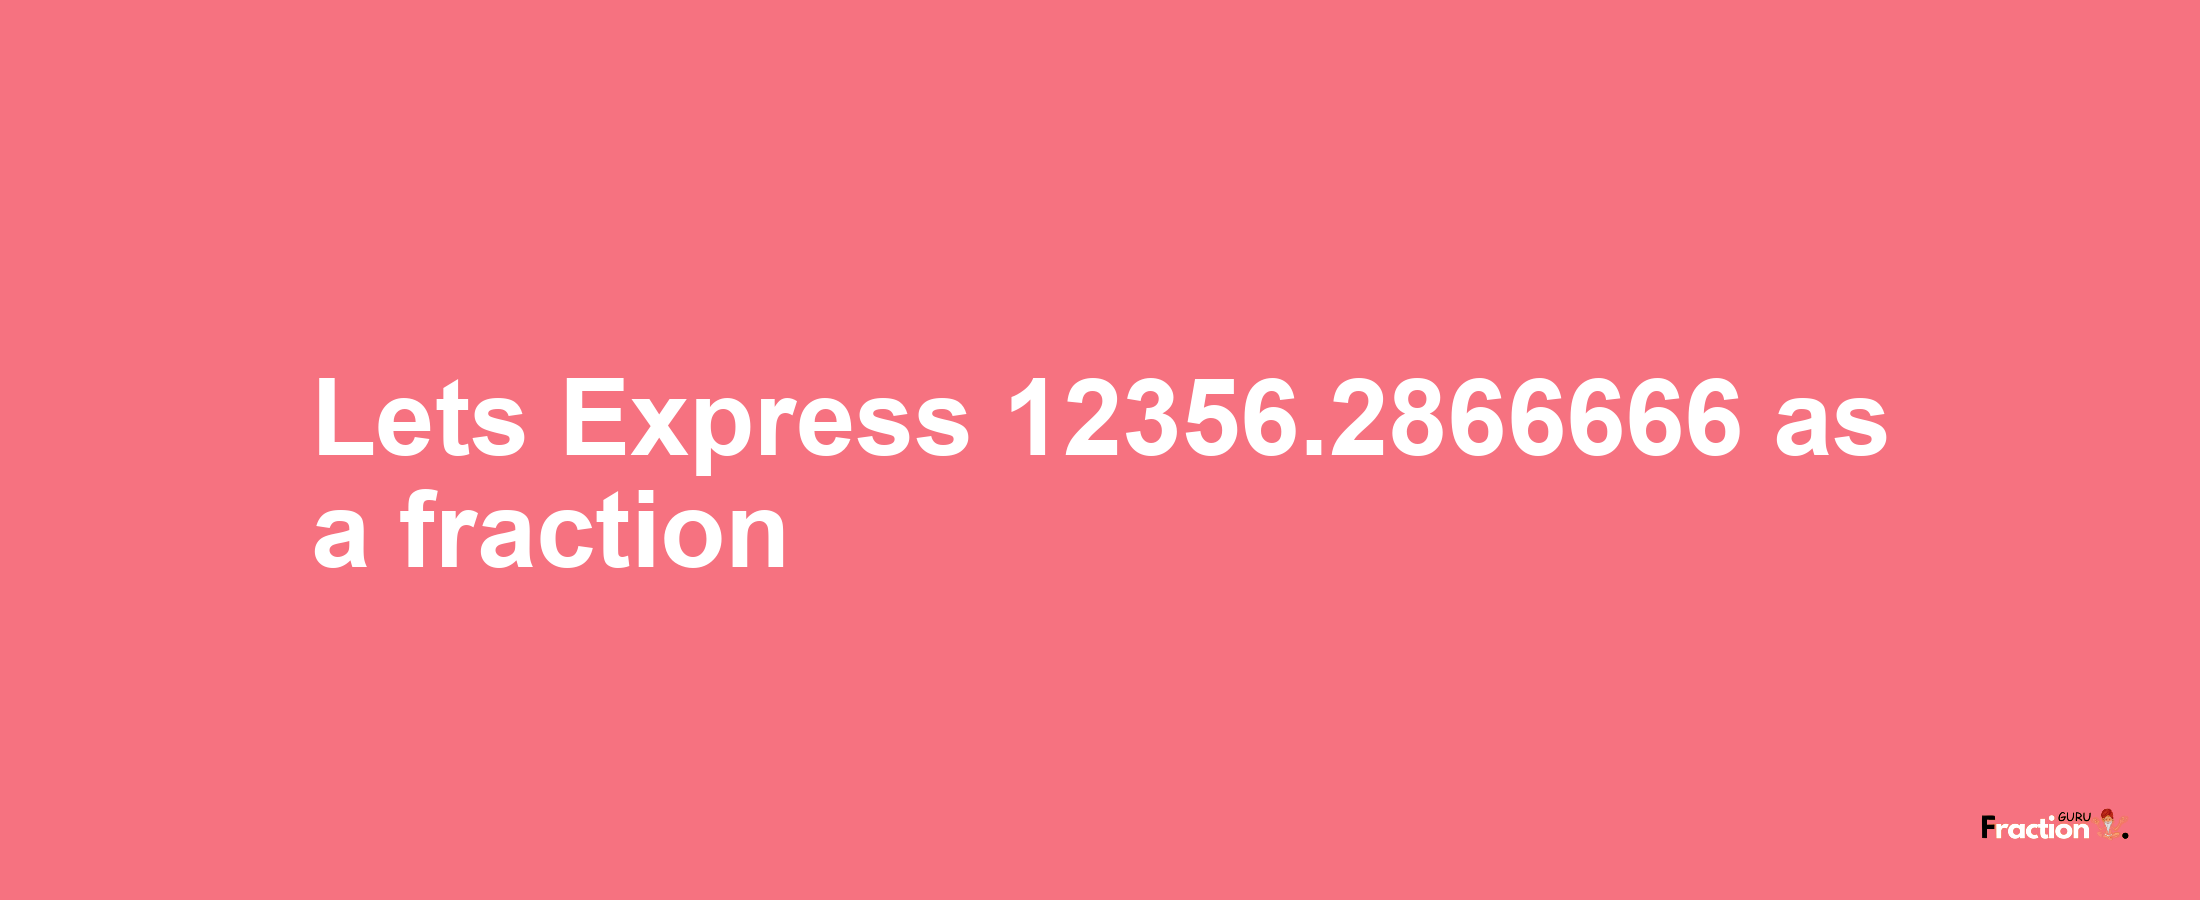 Lets Express 12356.2866666 as afraction